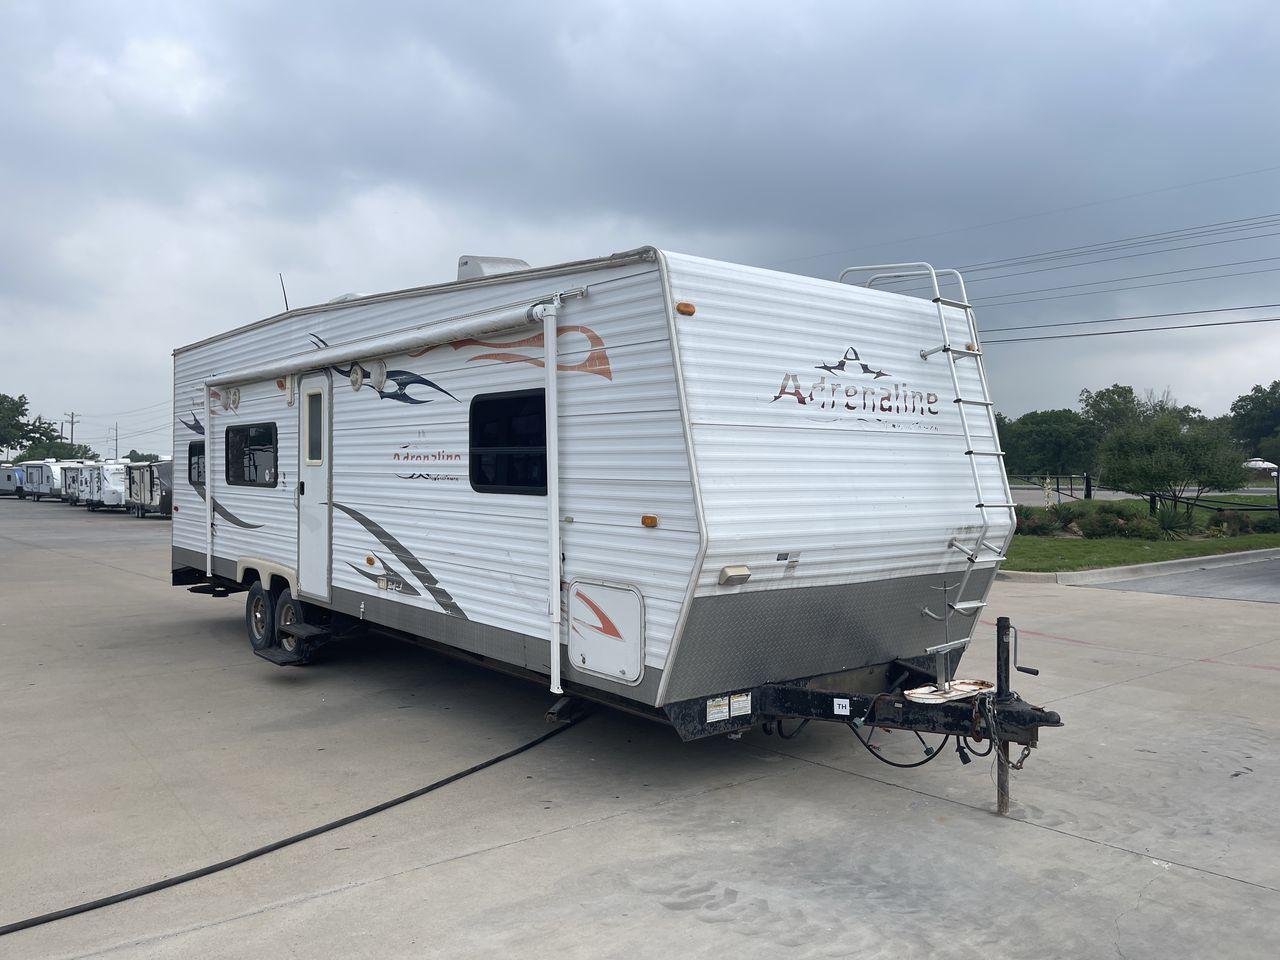 2008 WHITE ADRENALINE 23FS (1TC2B180683) , Length: 28.67 ft | Dry Weight: 6,474 lbs | Gross Weight: 9,500 lbs | Slides: 9 transmission, located at 4319 N Main Street, Cleburne, TX, 76033, (817) 221-0660, 32.435829, -97.384178 - The 2008 Adrenaline 23FS Toy Hauler is prepared for a journey! It is 28.67 feet long and weighs 6,474 pounds when dry. It's lightweight and portable, but large enough to hold all of your favorite toys and accessories. It can accommodate up to 9,500 pounds, so you'll have plenty of room for your next - Photo #23